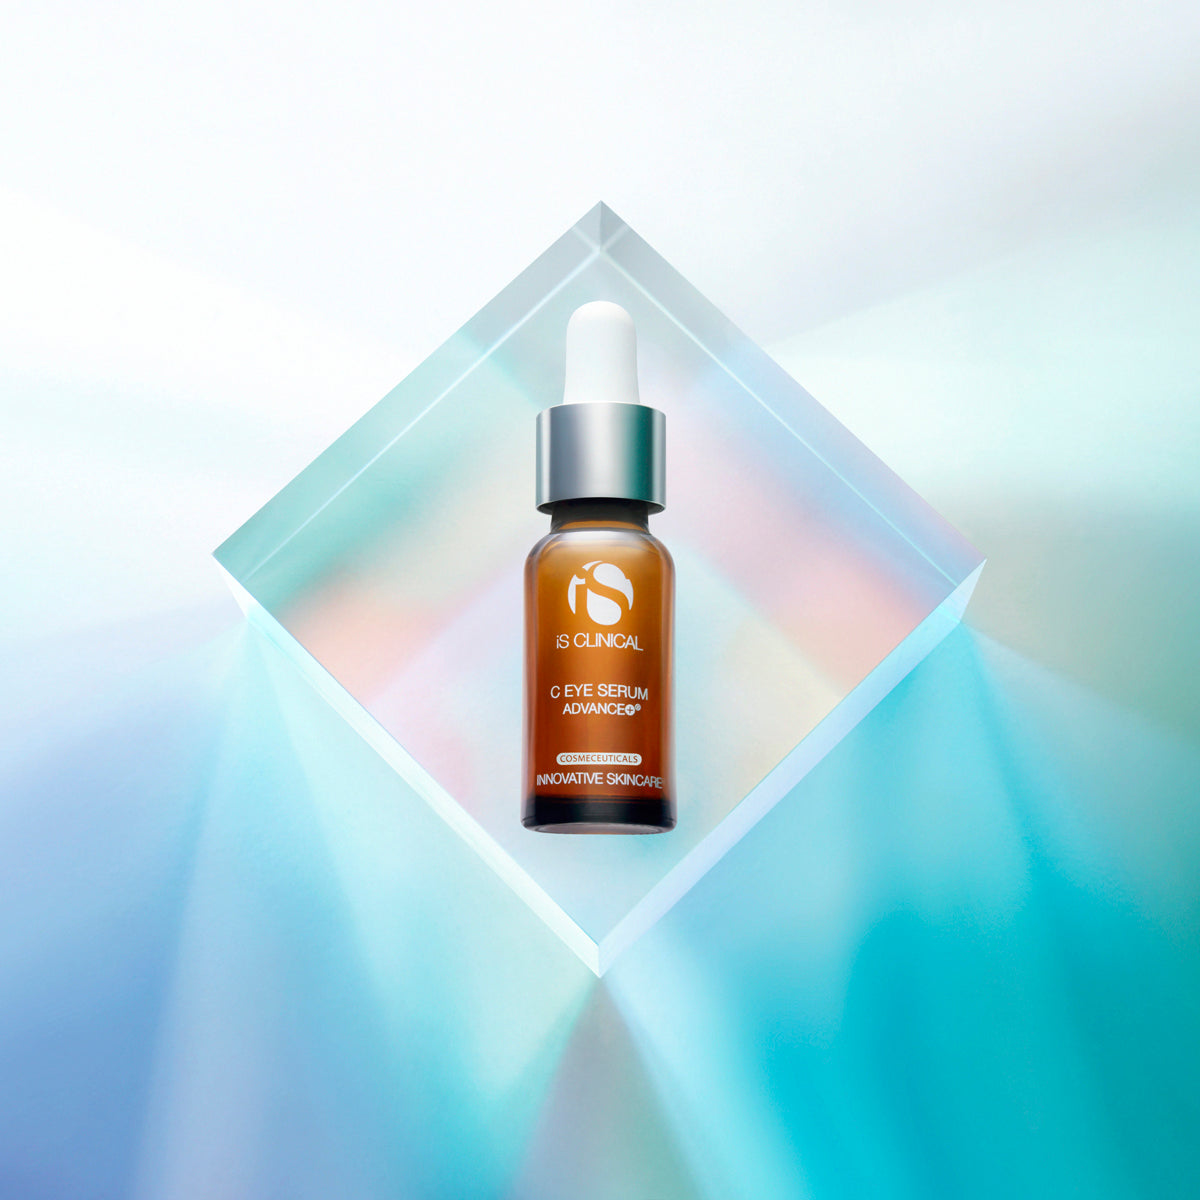 iS Clinical C Eye Serum Advance+  from MyExceptionalSkinCare.com Lifestyle